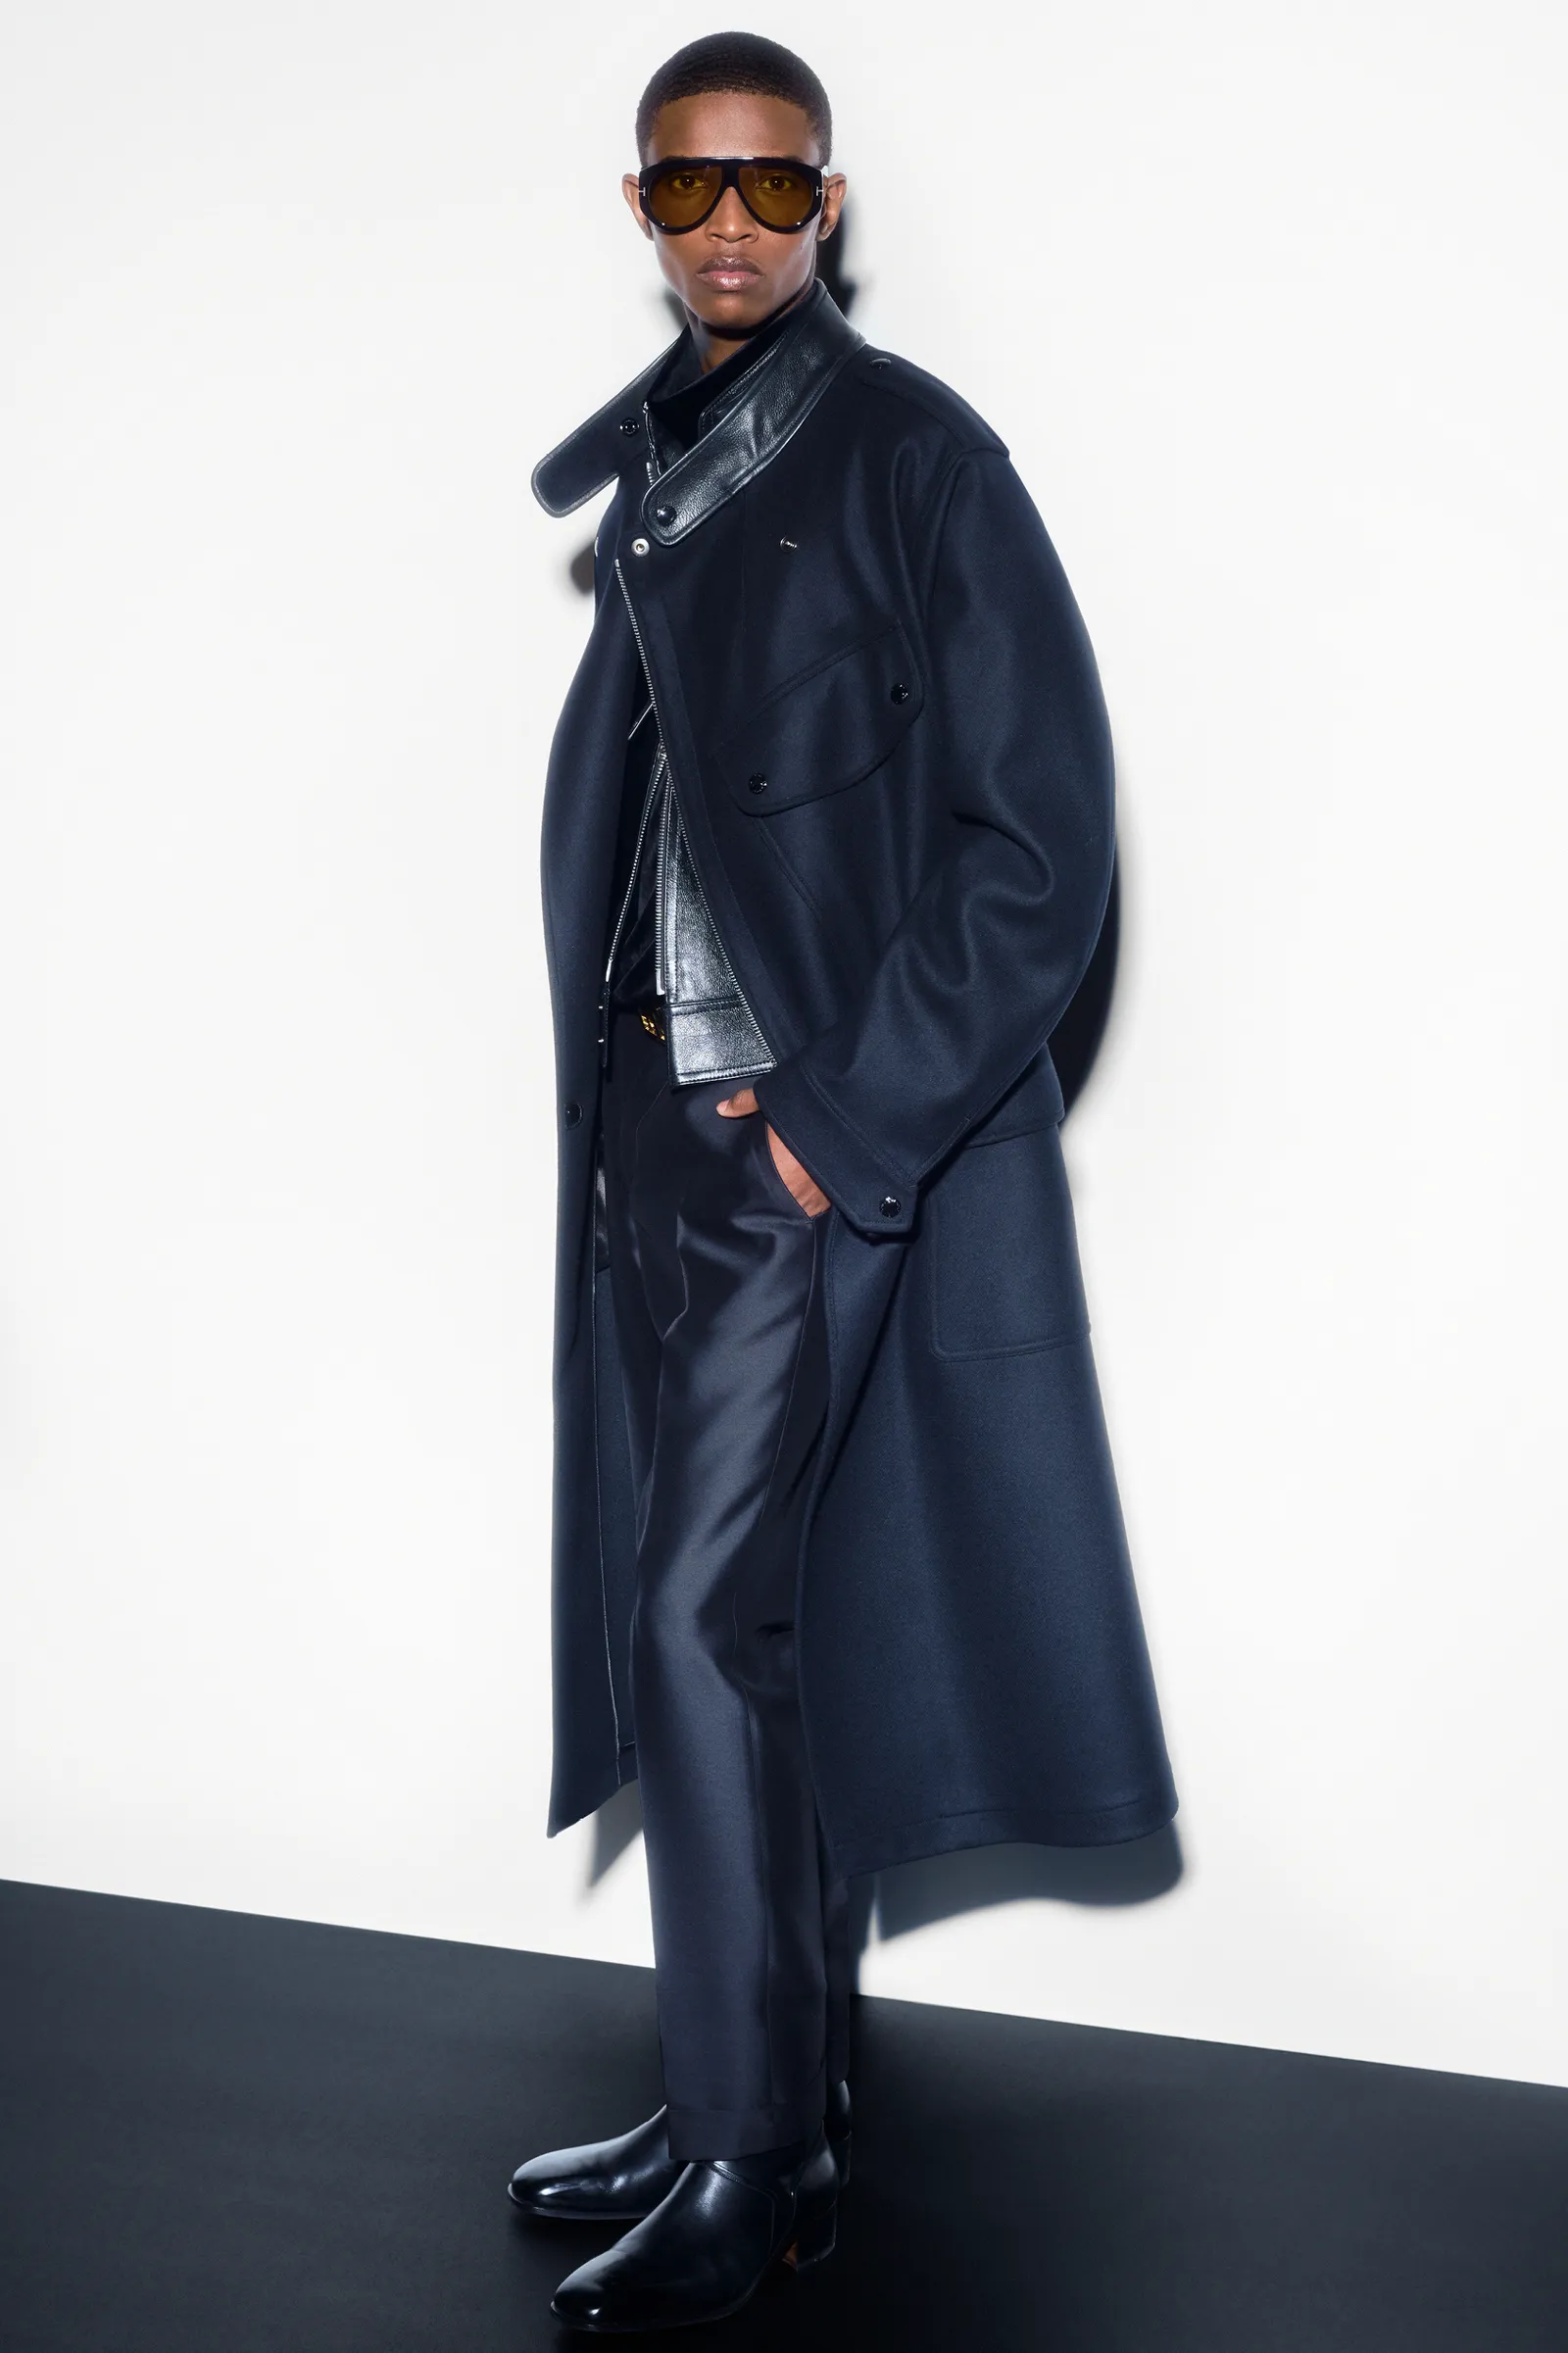 00028-tom-ford-fall-22-mens-nyc-credit-brand.png